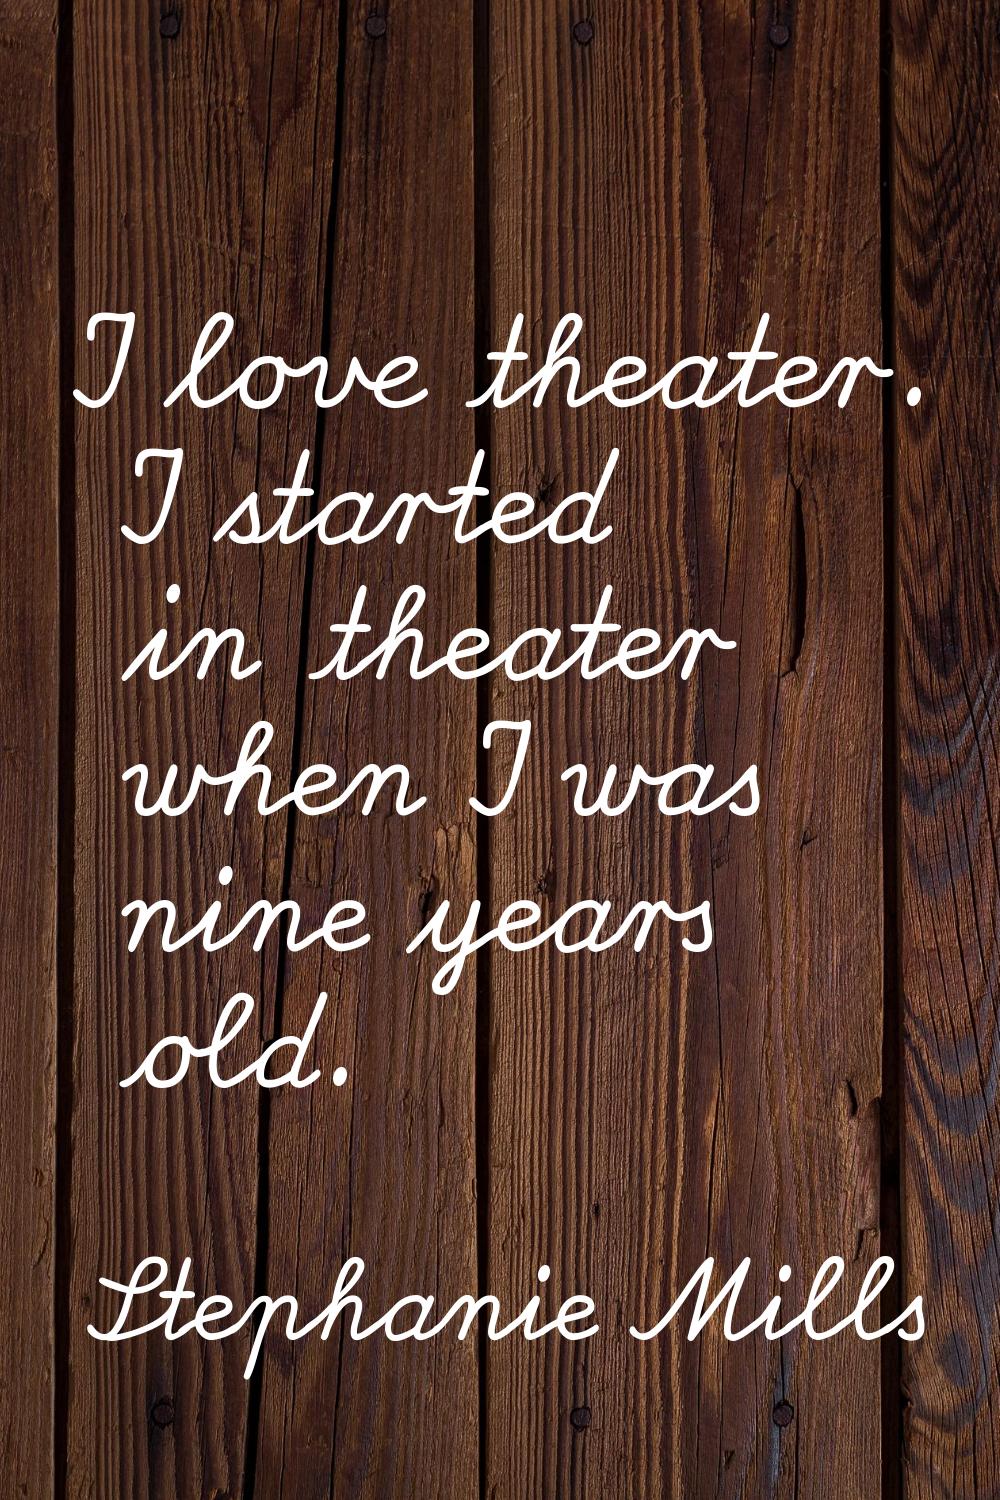 I love theater. I started in theater when I was nine years old.